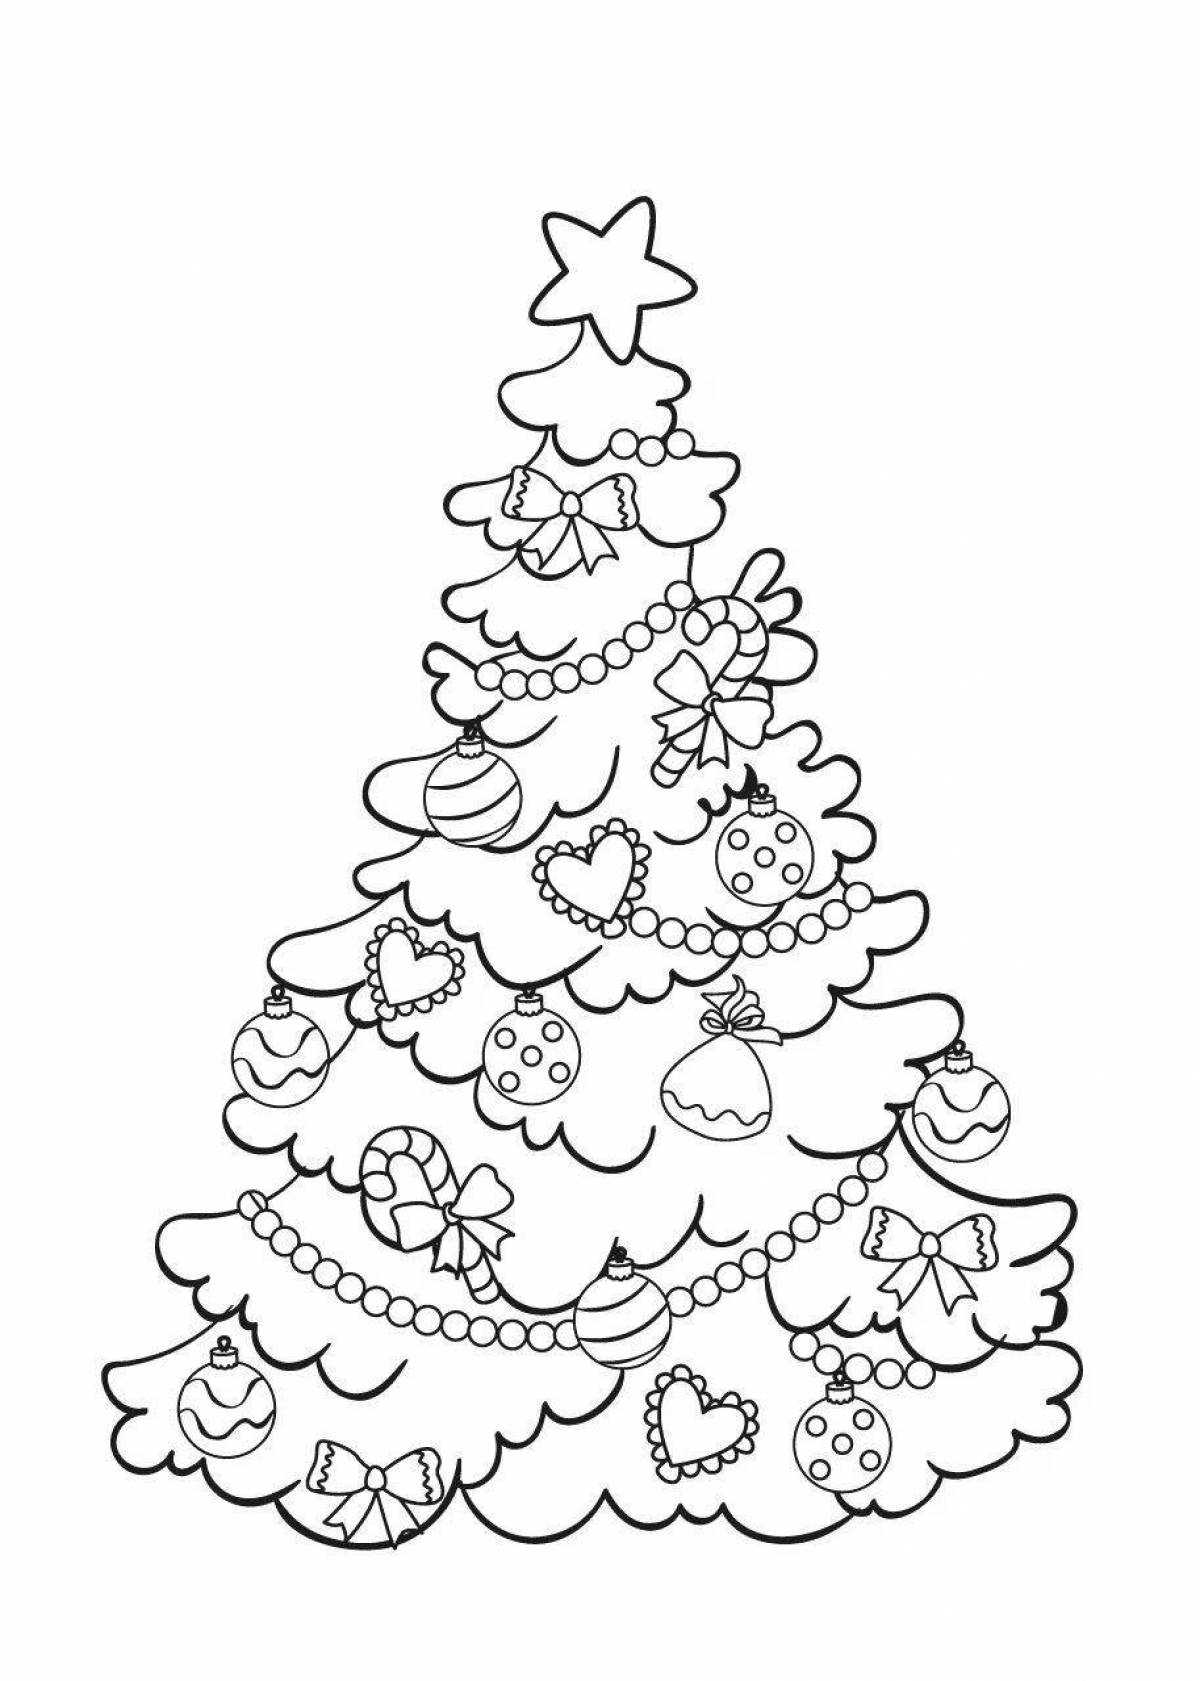 Coloring book big Christmas tree for children 5-6 years old